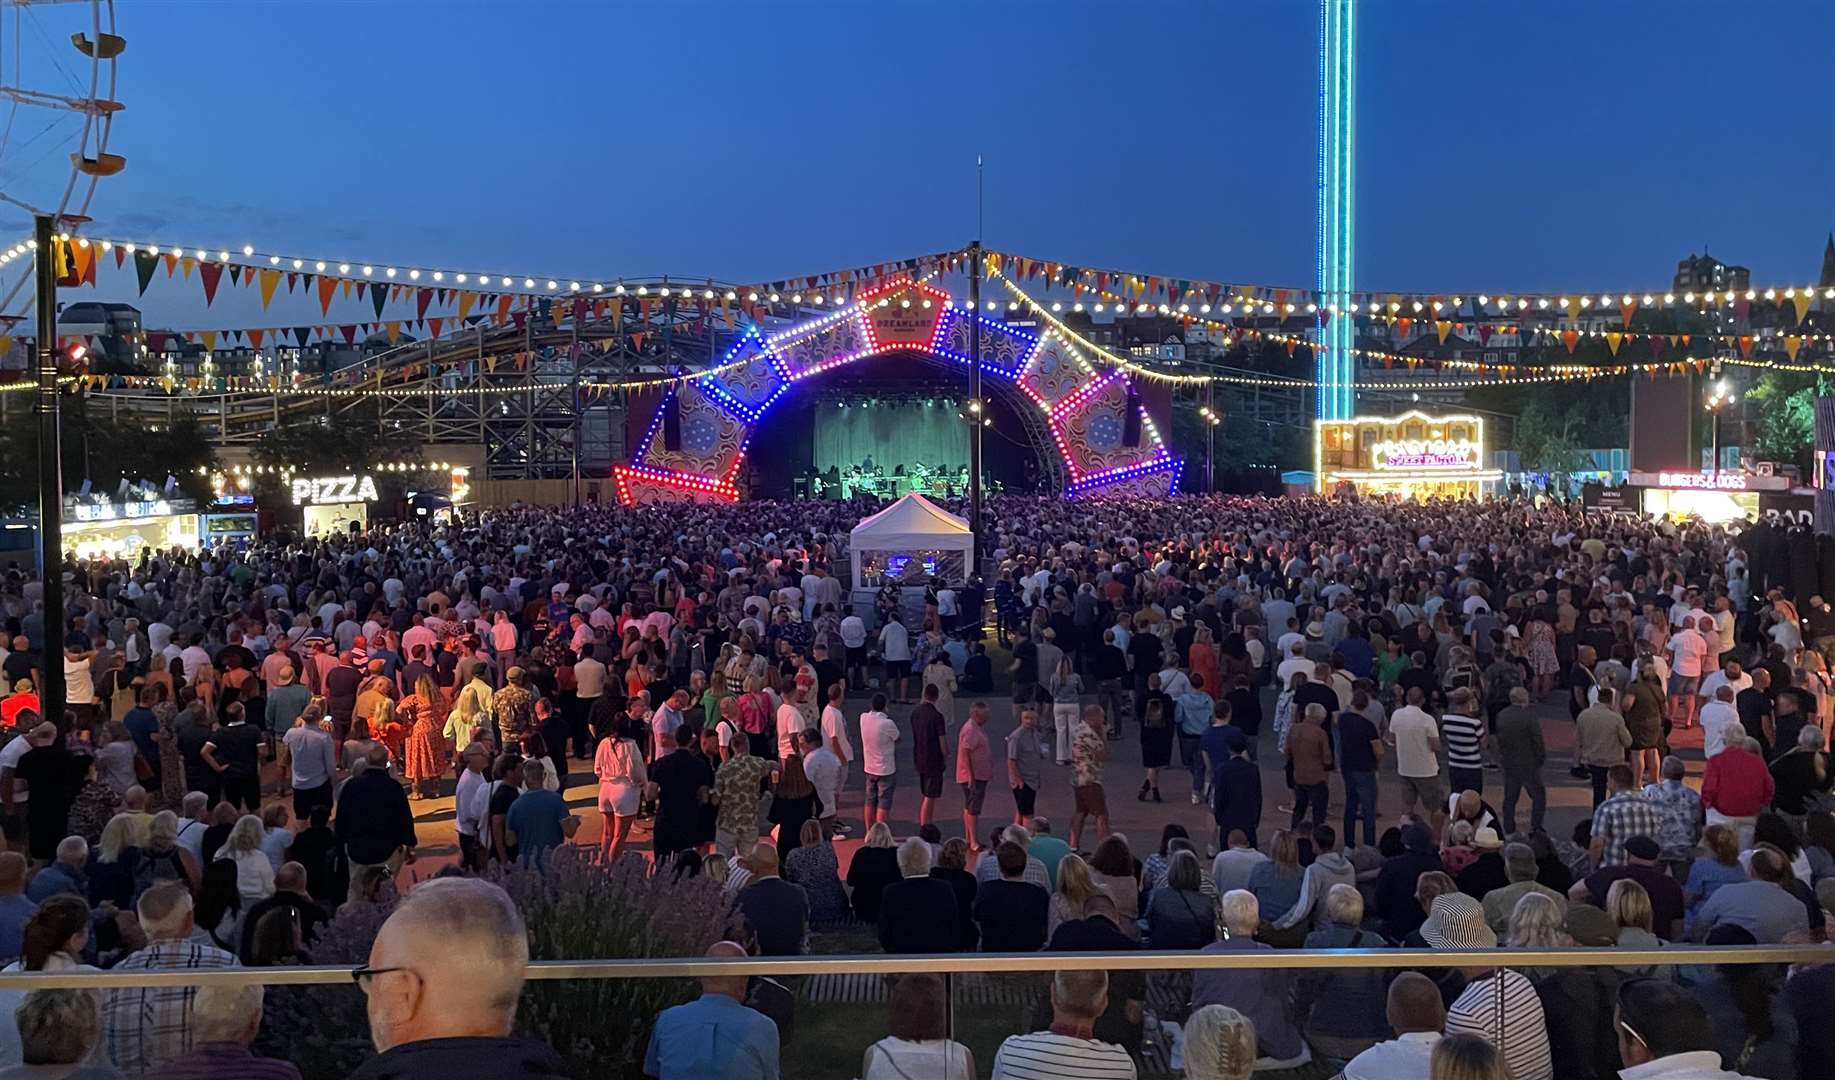 Paul Weller played to a sell-out crowd at Dreamland, Margate